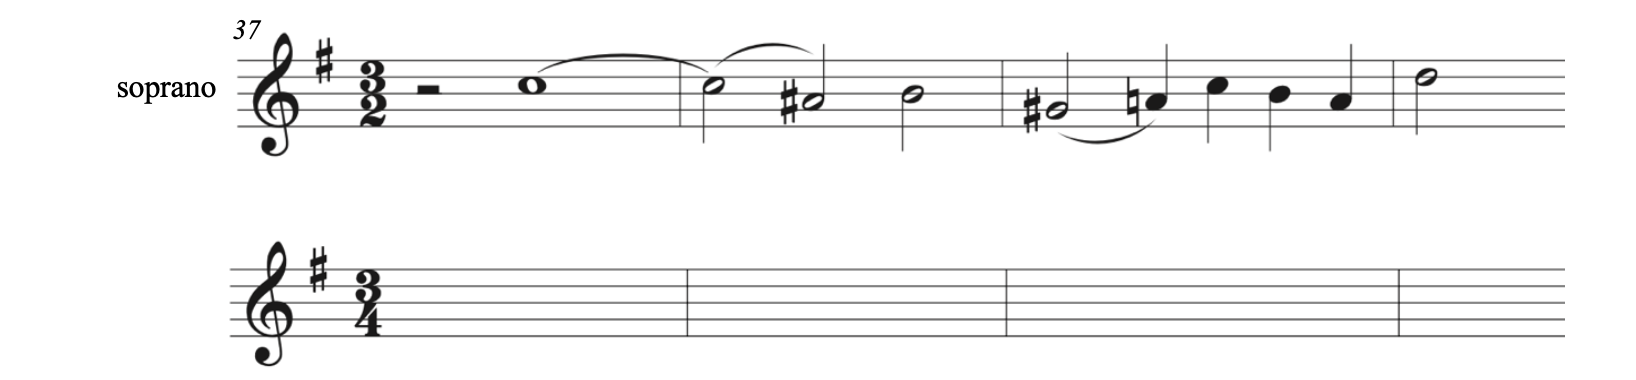 Bach, "Crucifixus," Mass in B Minor, BWV 232. The given line is in treble clef and is in 3-2. It begins on measure 37. In measure 37, there is a half rest followed by a whole note on C5 tied across the bar line to a half note. In measure 38, there is also a half note on A-sharp4 and a half note on B4. Measure 39 contains a half note on G-sharp4 followed by four quarter notes (A-natural4, C5, B4, and A4). Measure 40 has a half note on D5. Rewrite in 3-4.